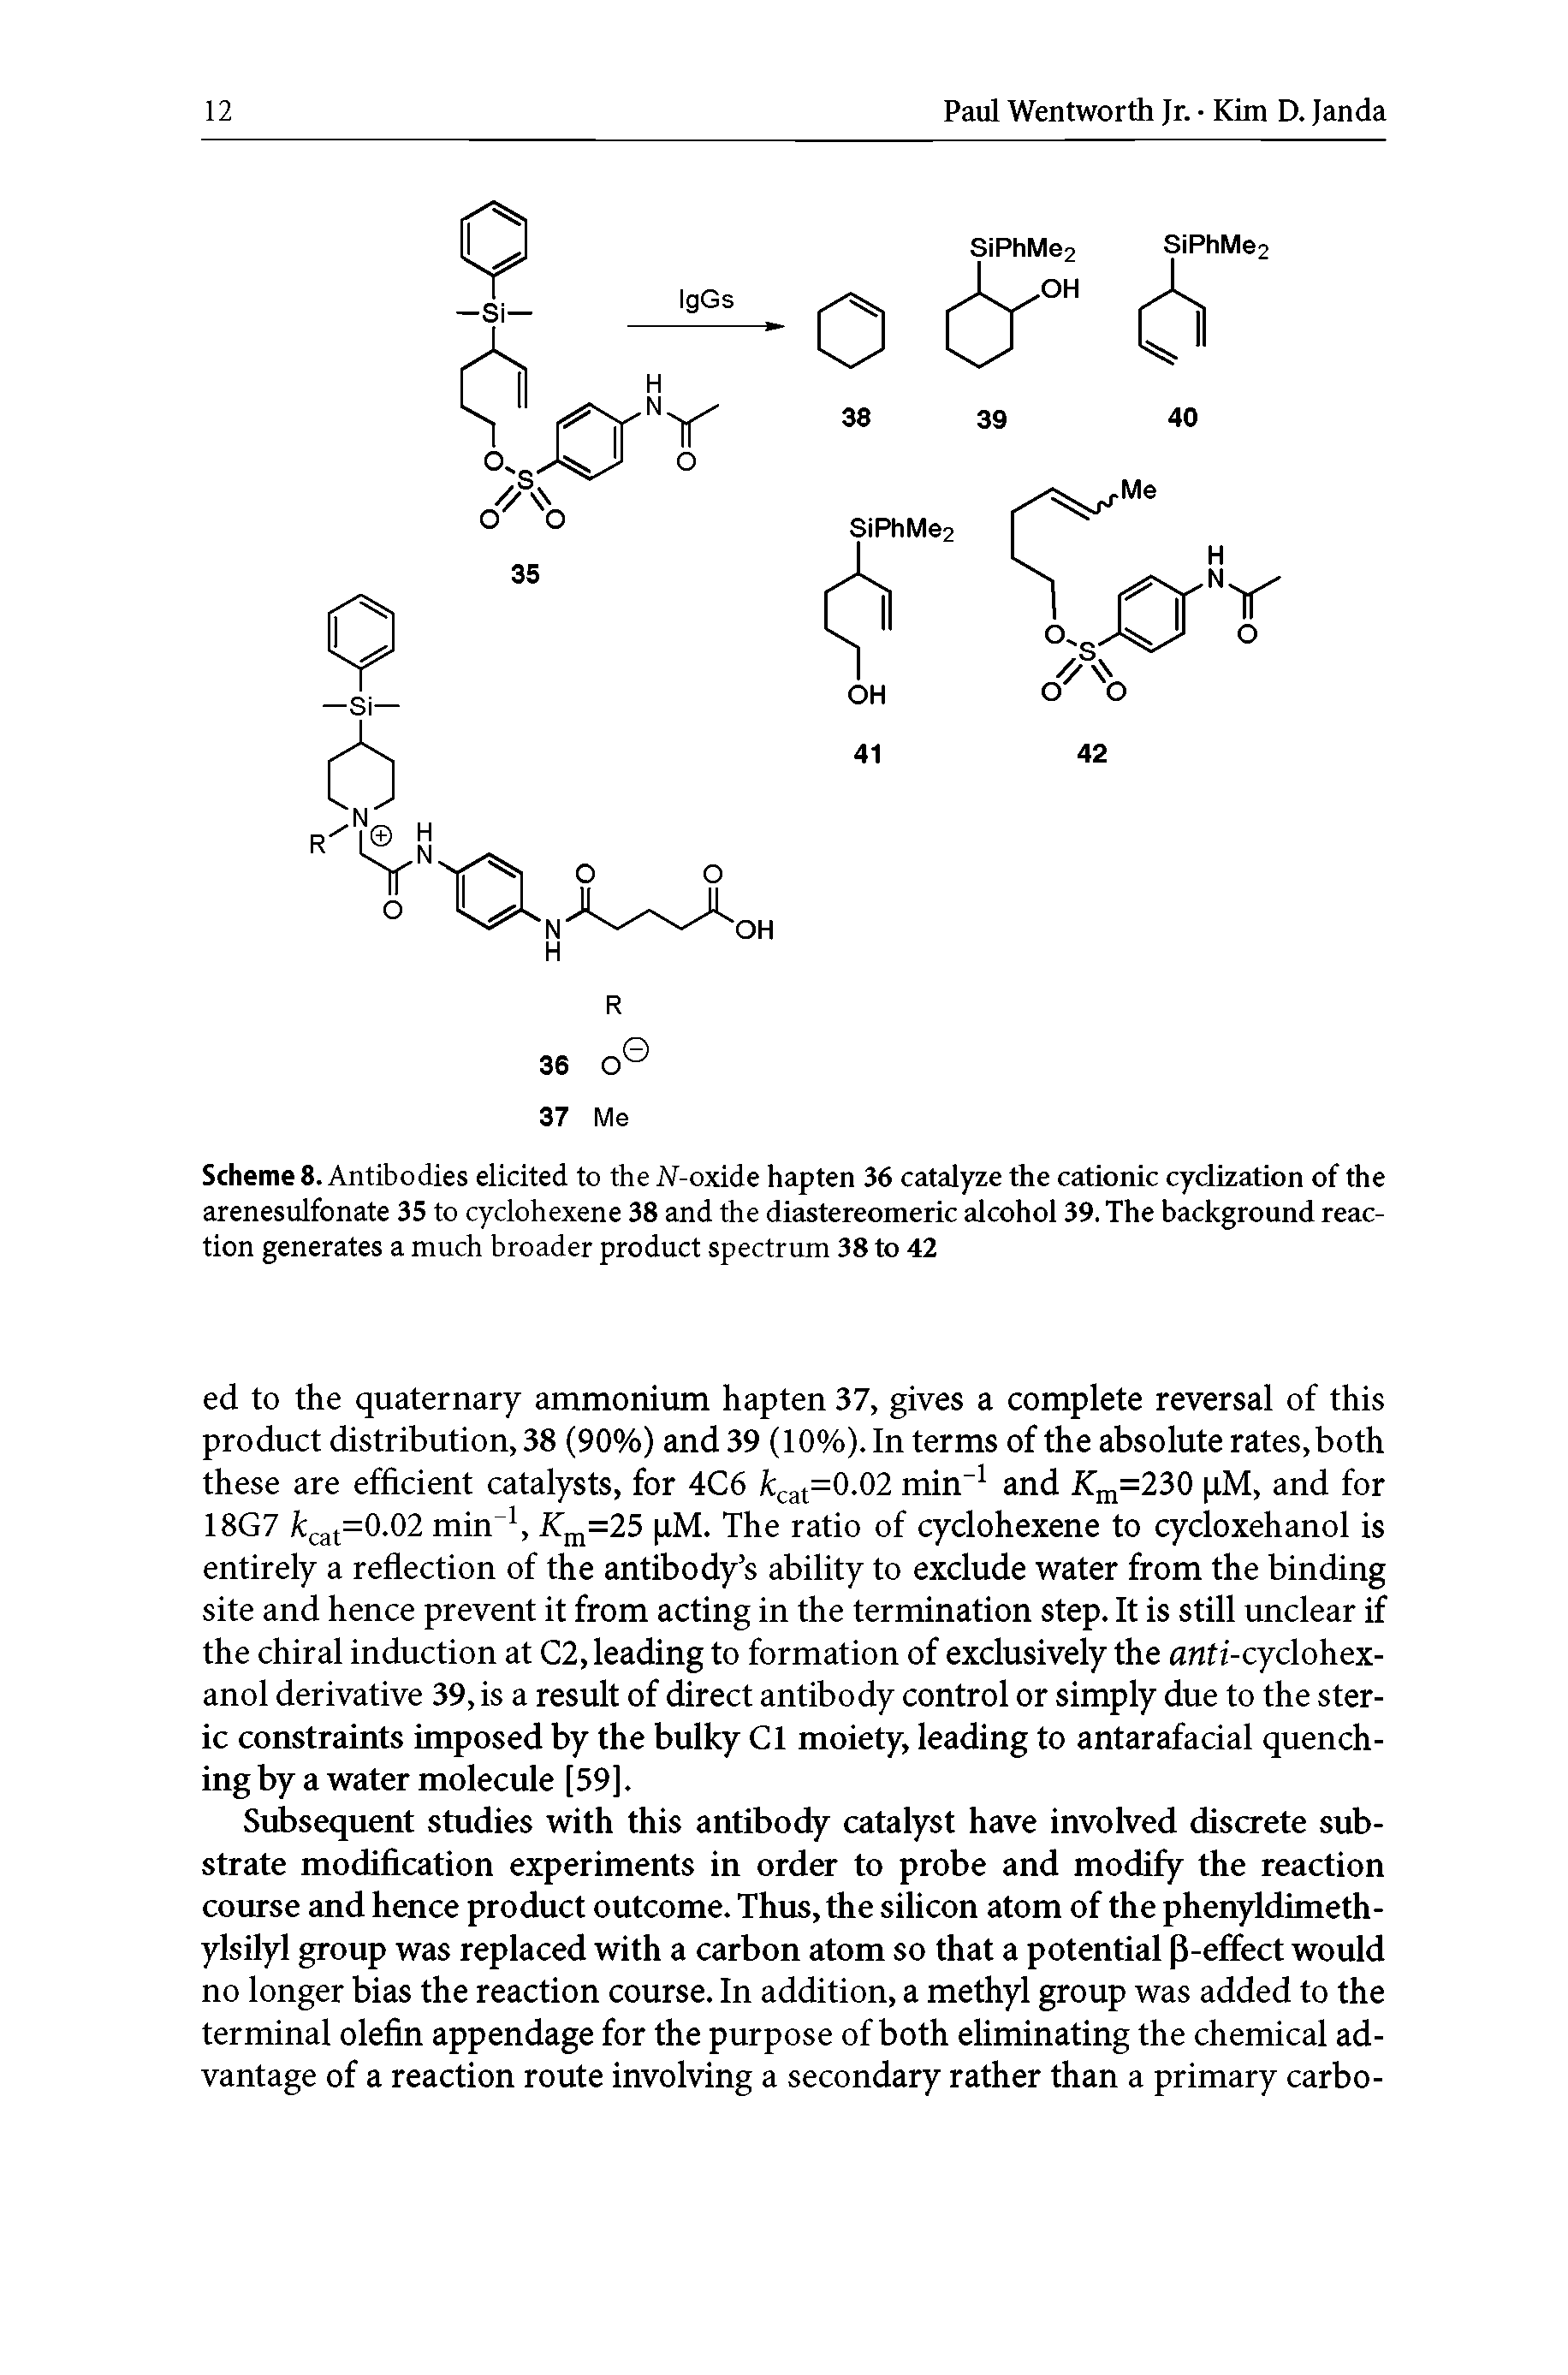 Scheme 8. Antibodies elicited to the JV-oxide hapten 36 catalyze the cationic cyclization of the arenesulfonate 35 to cyclohexene 38 and the diastereomeric alcohol 39. The background reaction generates a much broader product spectrum 38 to 42...